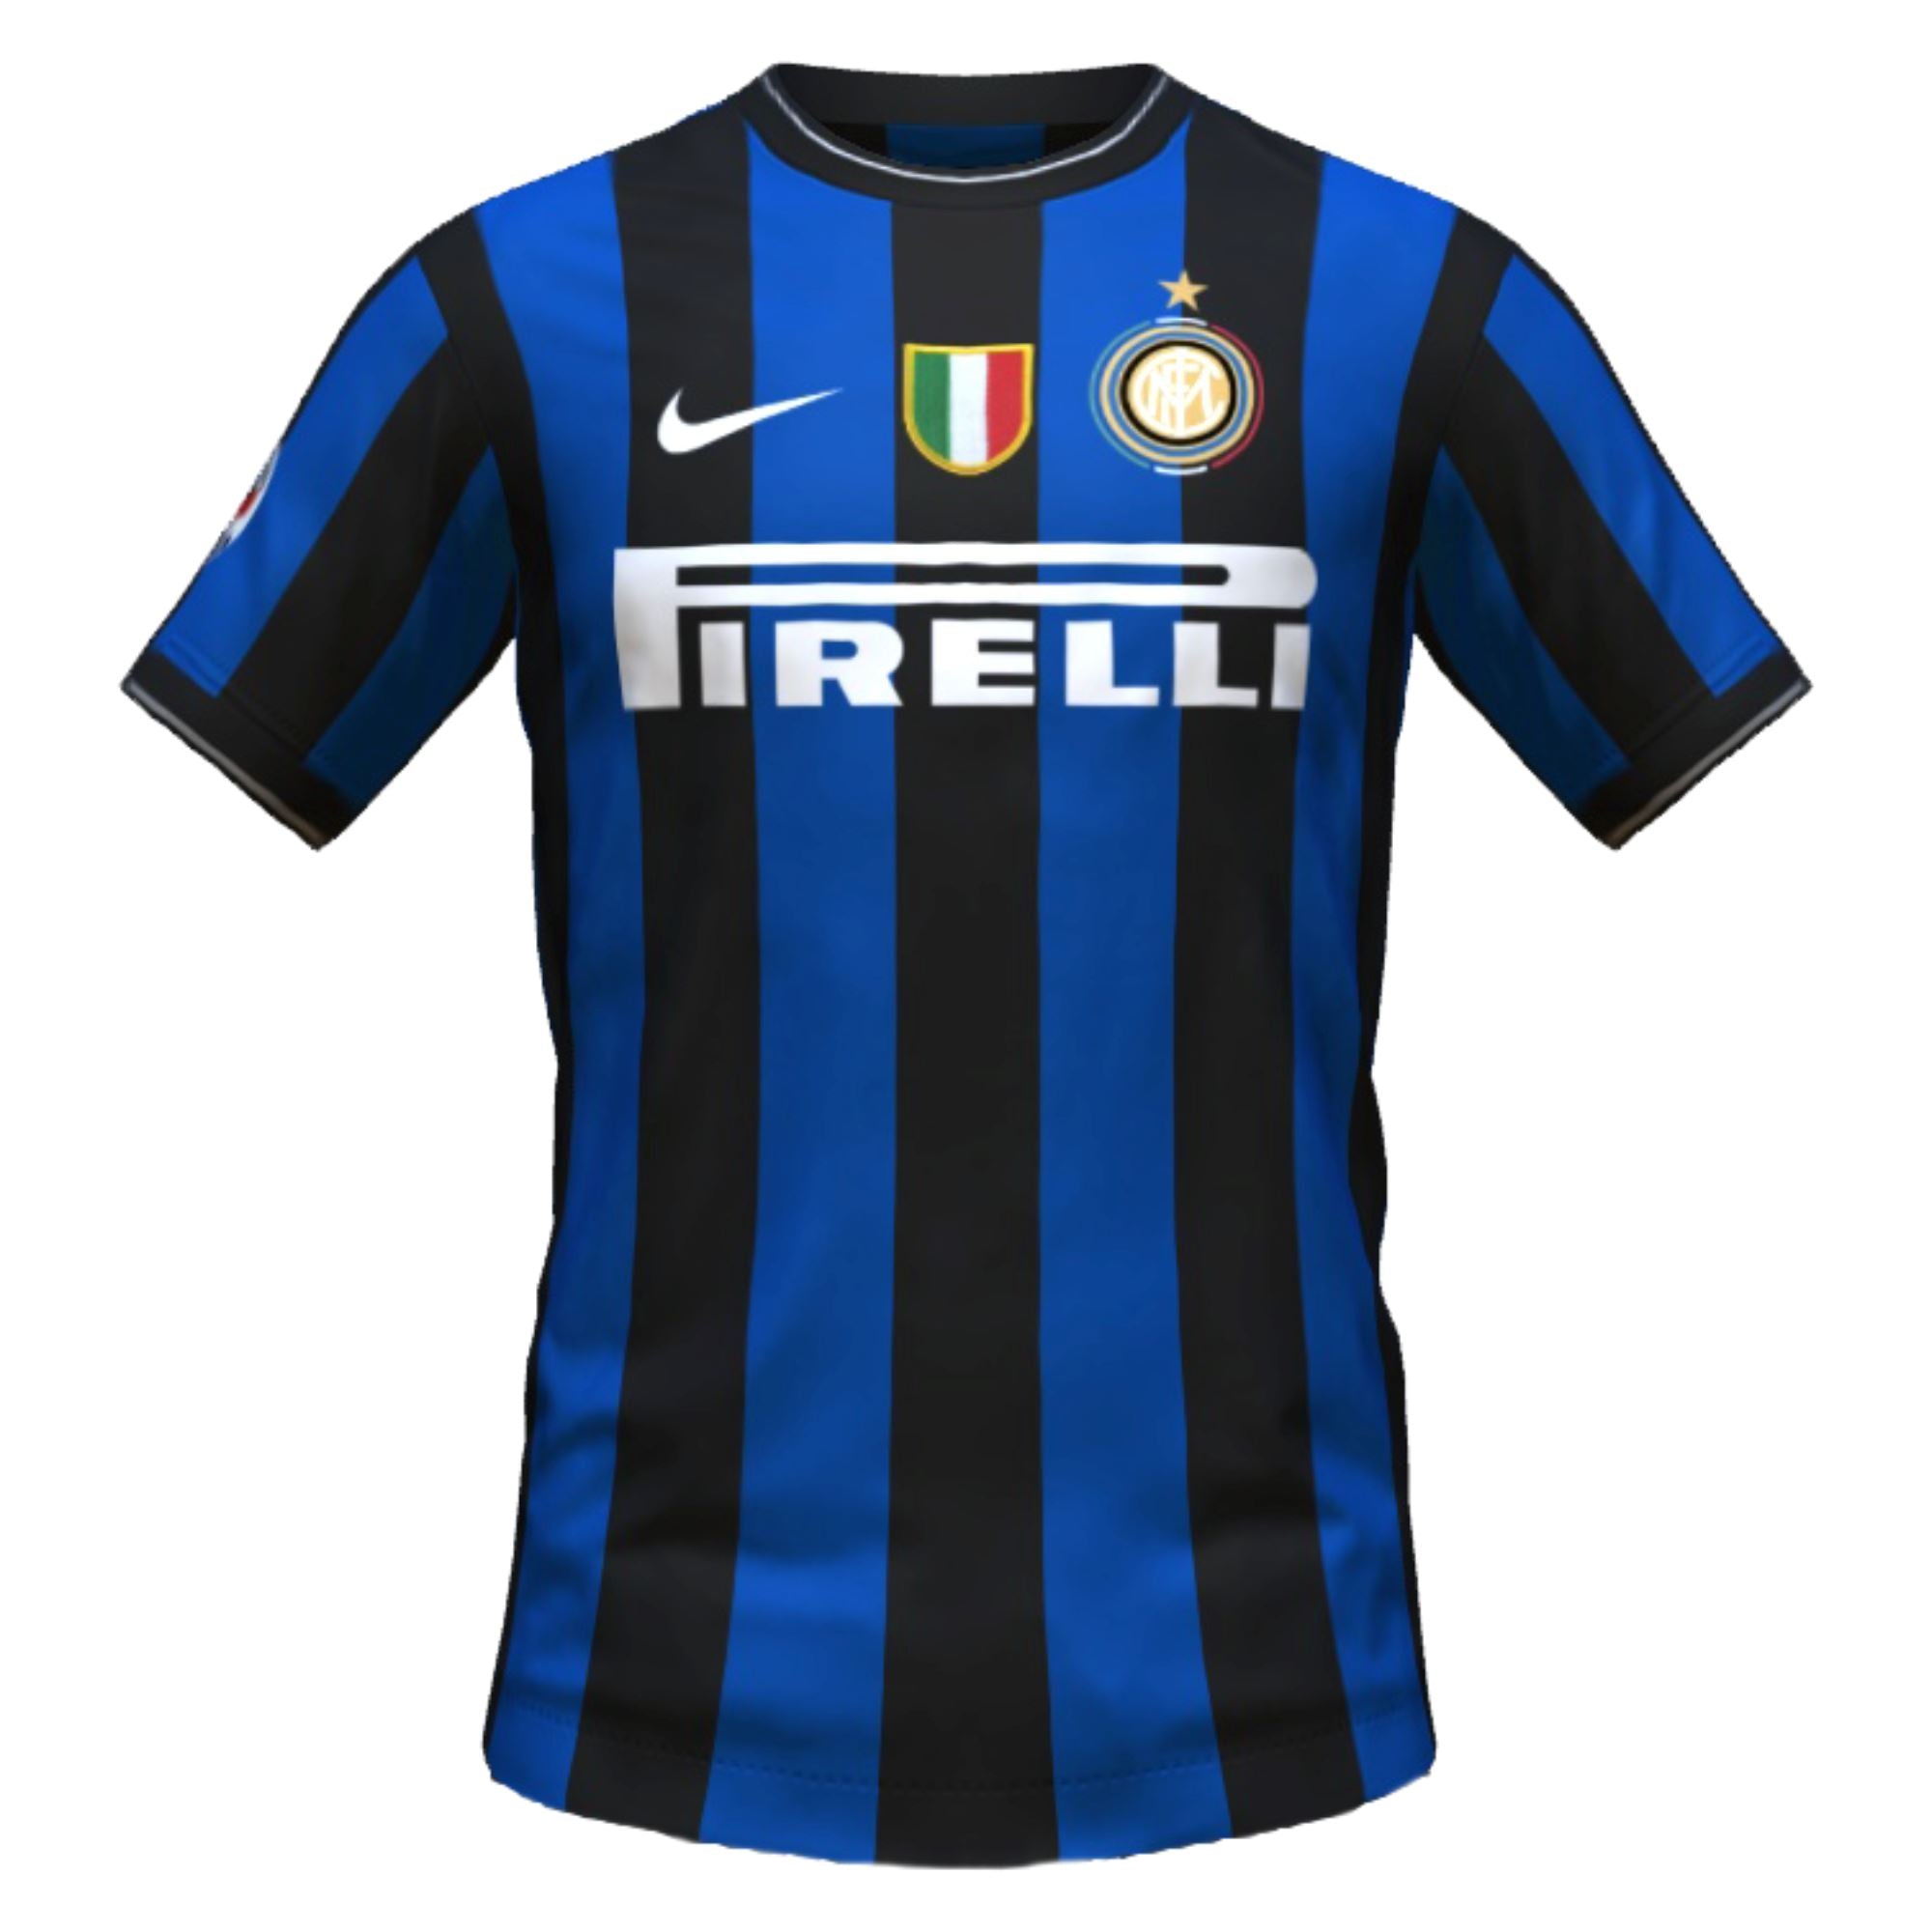 Retro 2010 Inter Home Jersey - Euro Cup Final Kit